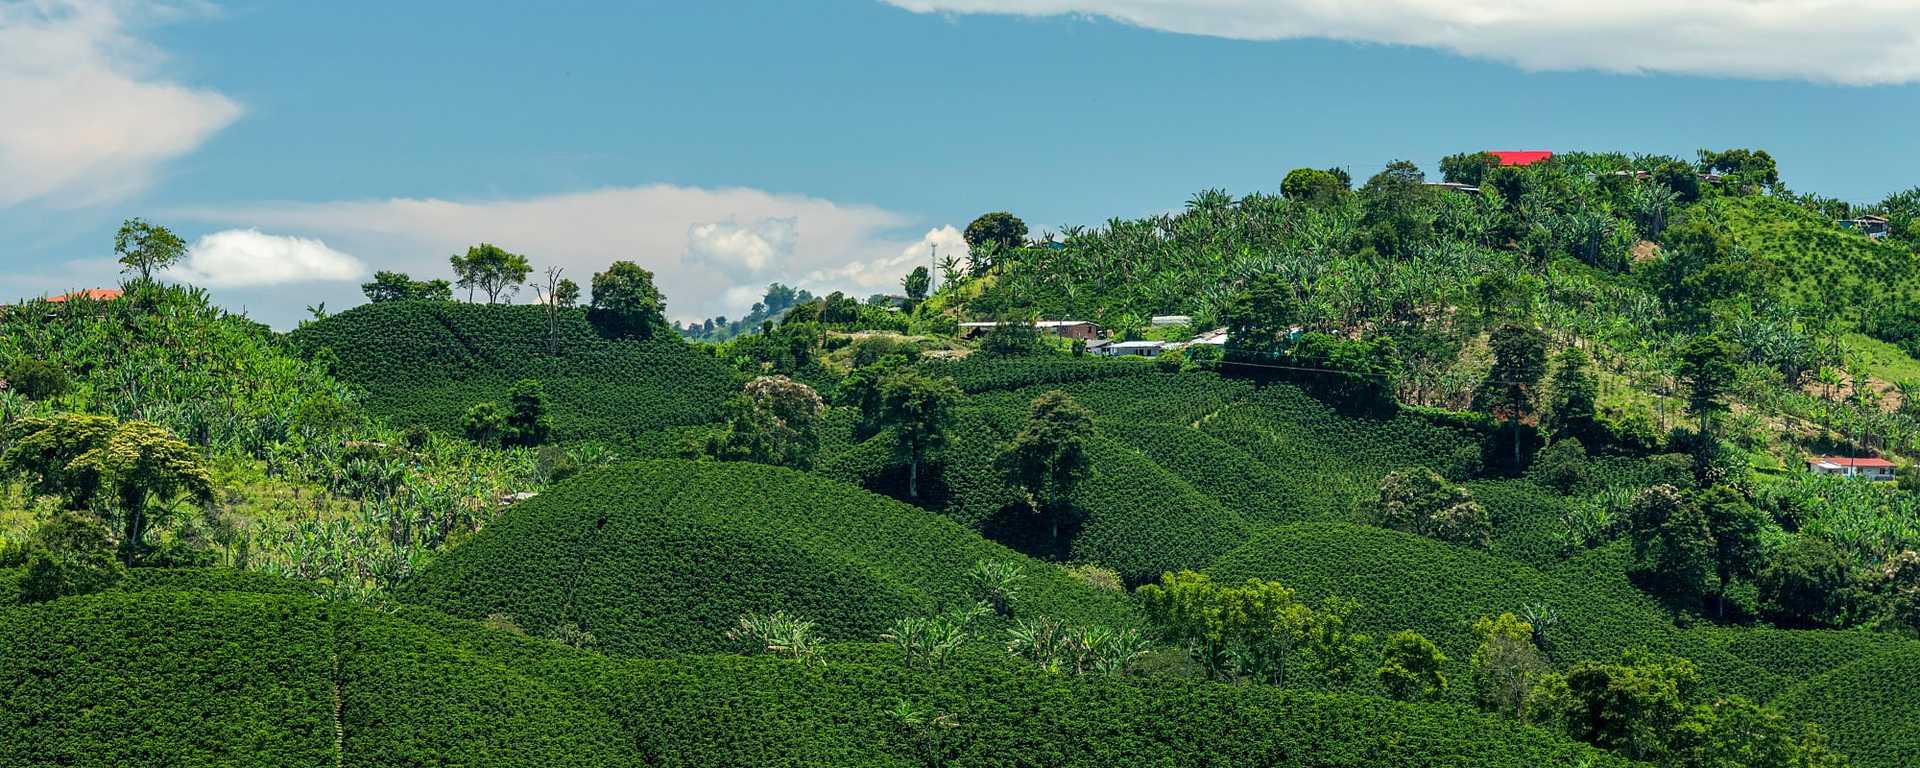 Coffee plantation landscape in the Colombia Coffee Triangle